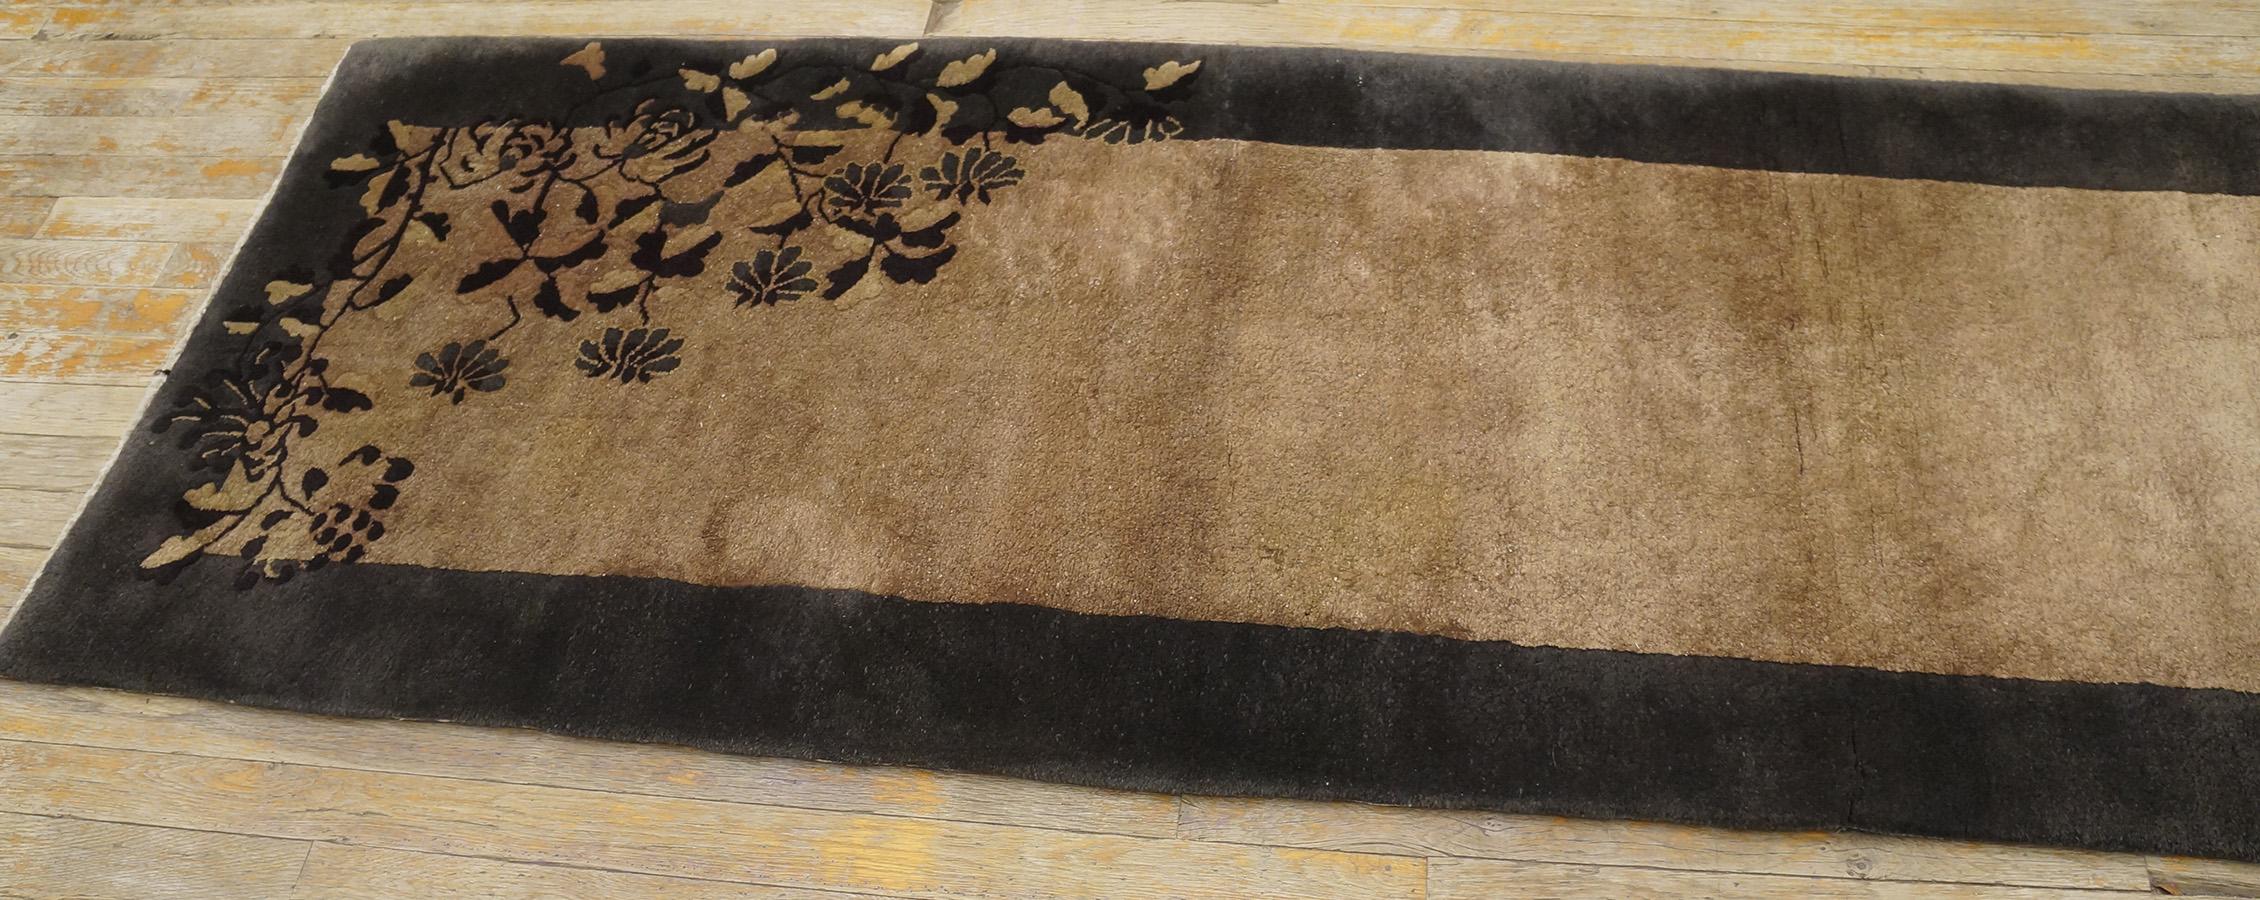 Antique Chinese Art Deco Rug 2' 6'' x 8' 10'' In Good Condition For Sale In New York, NY